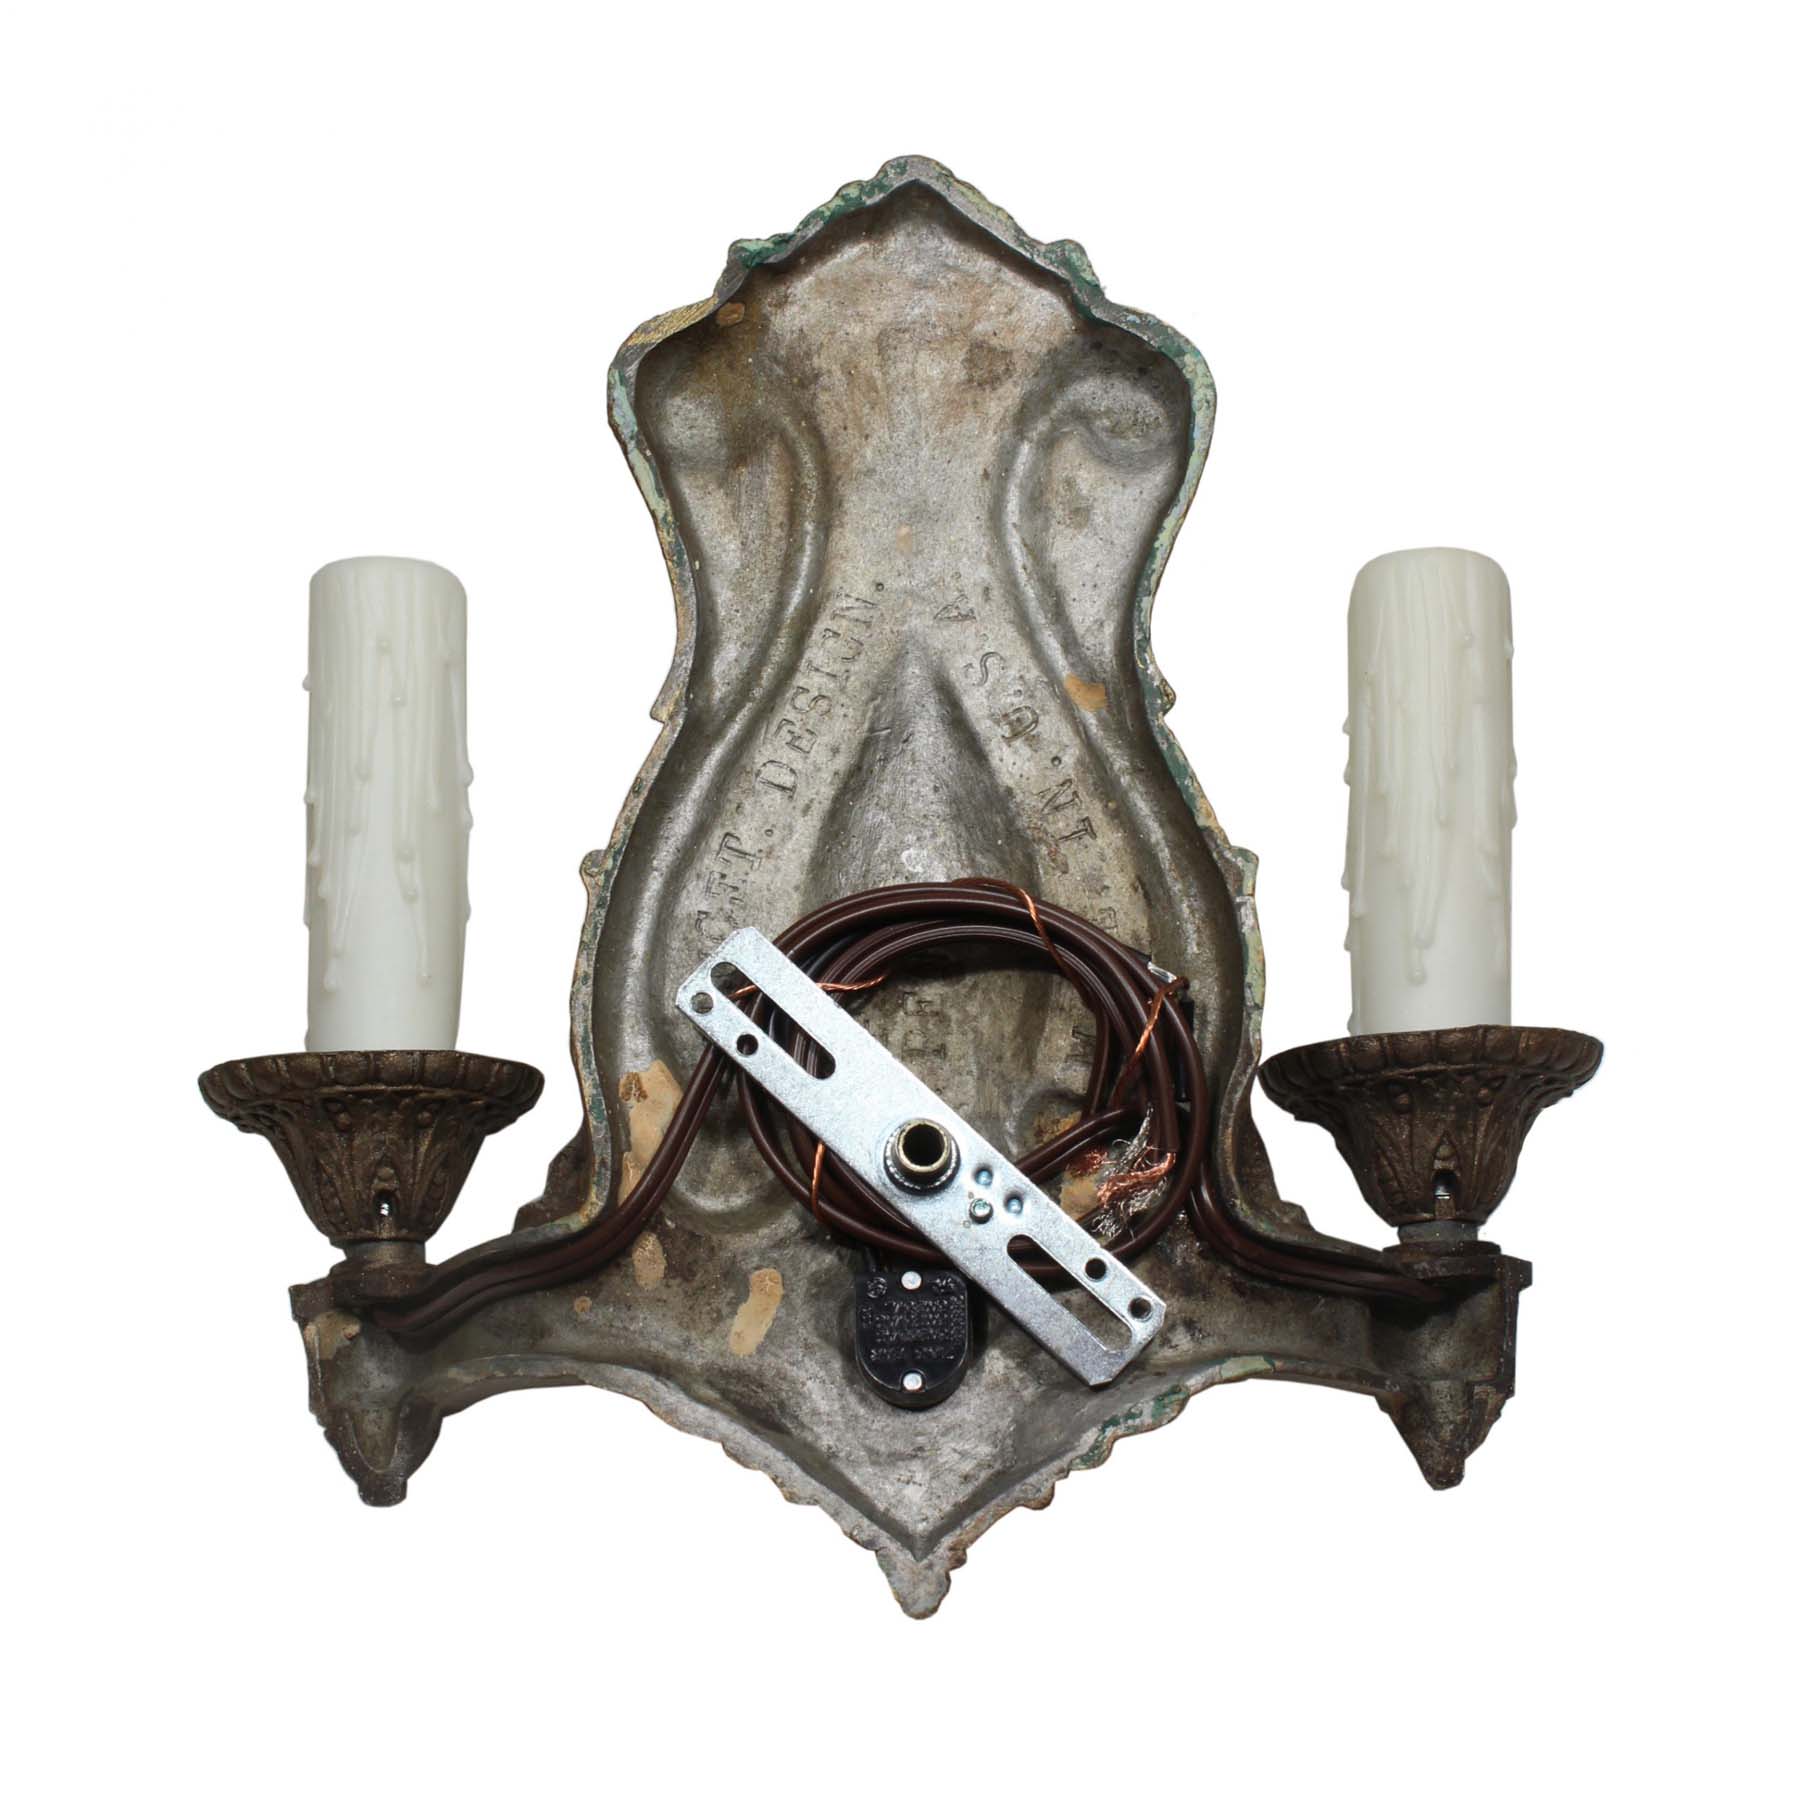 SOLD Pair of Antique Neoclassical Double-Arm Sconces-70440